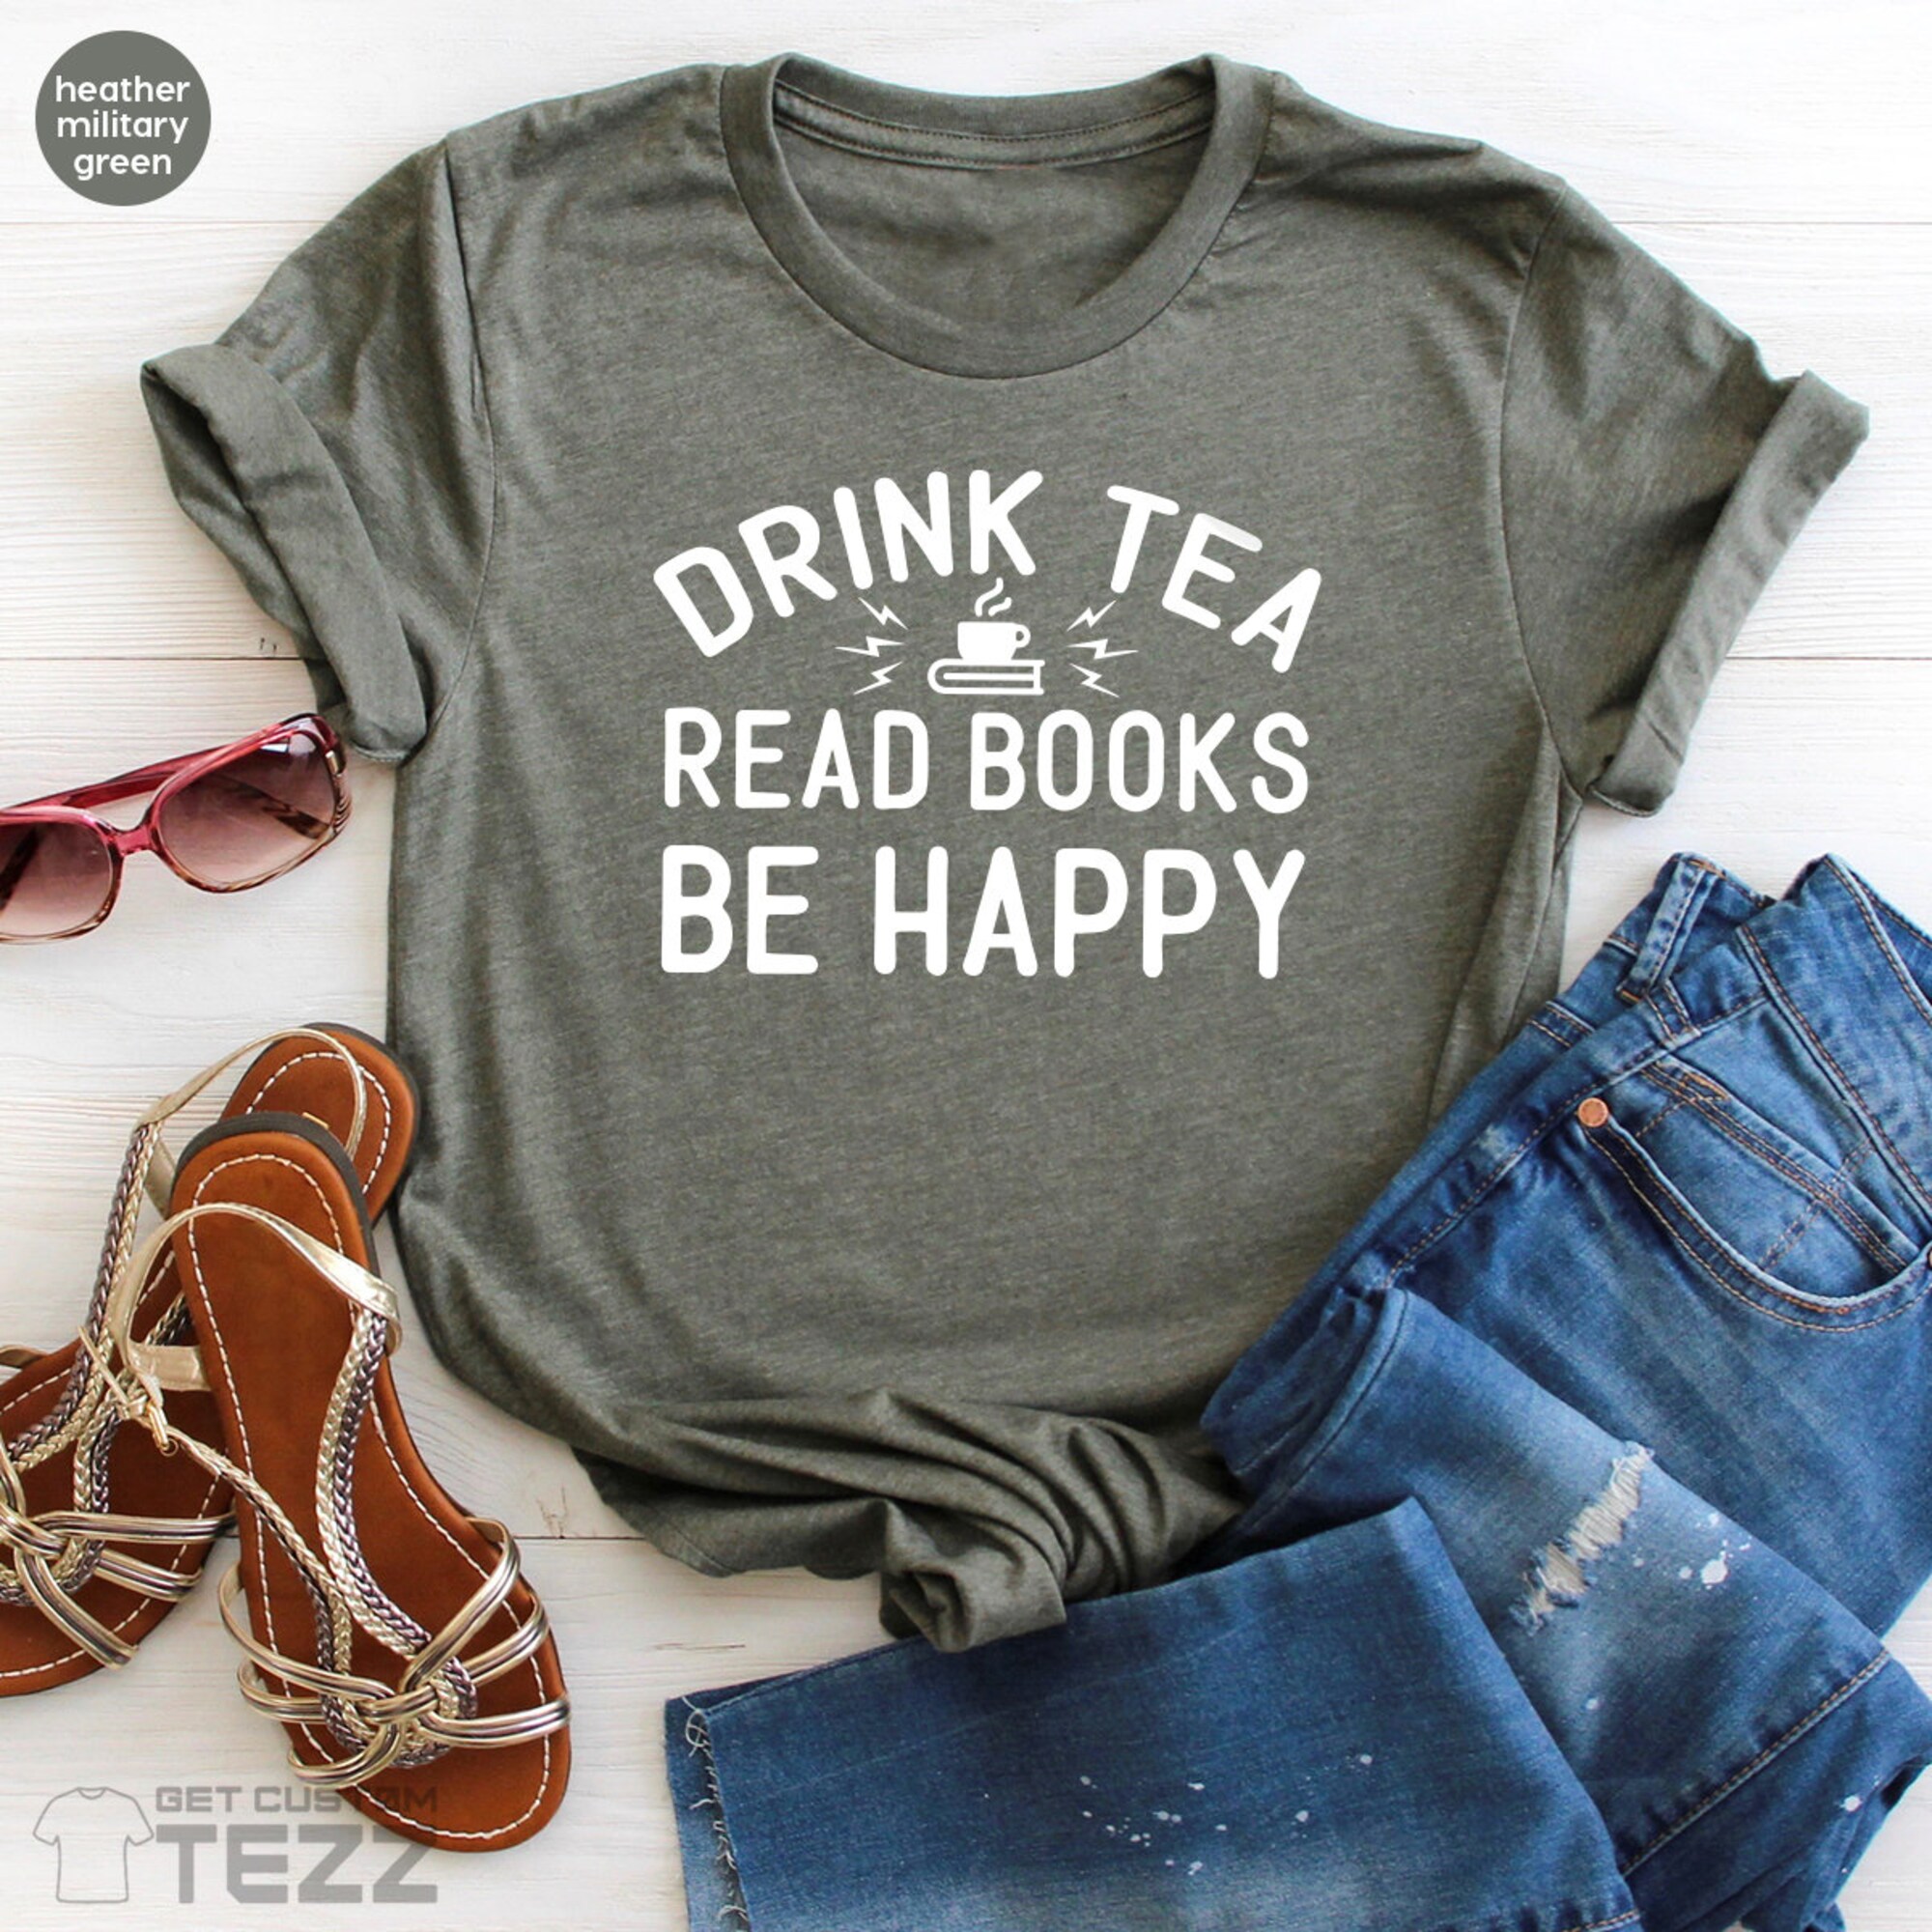 Book Lovers TShirts, Drink Tea T-Shirt, Book Reader Gifts